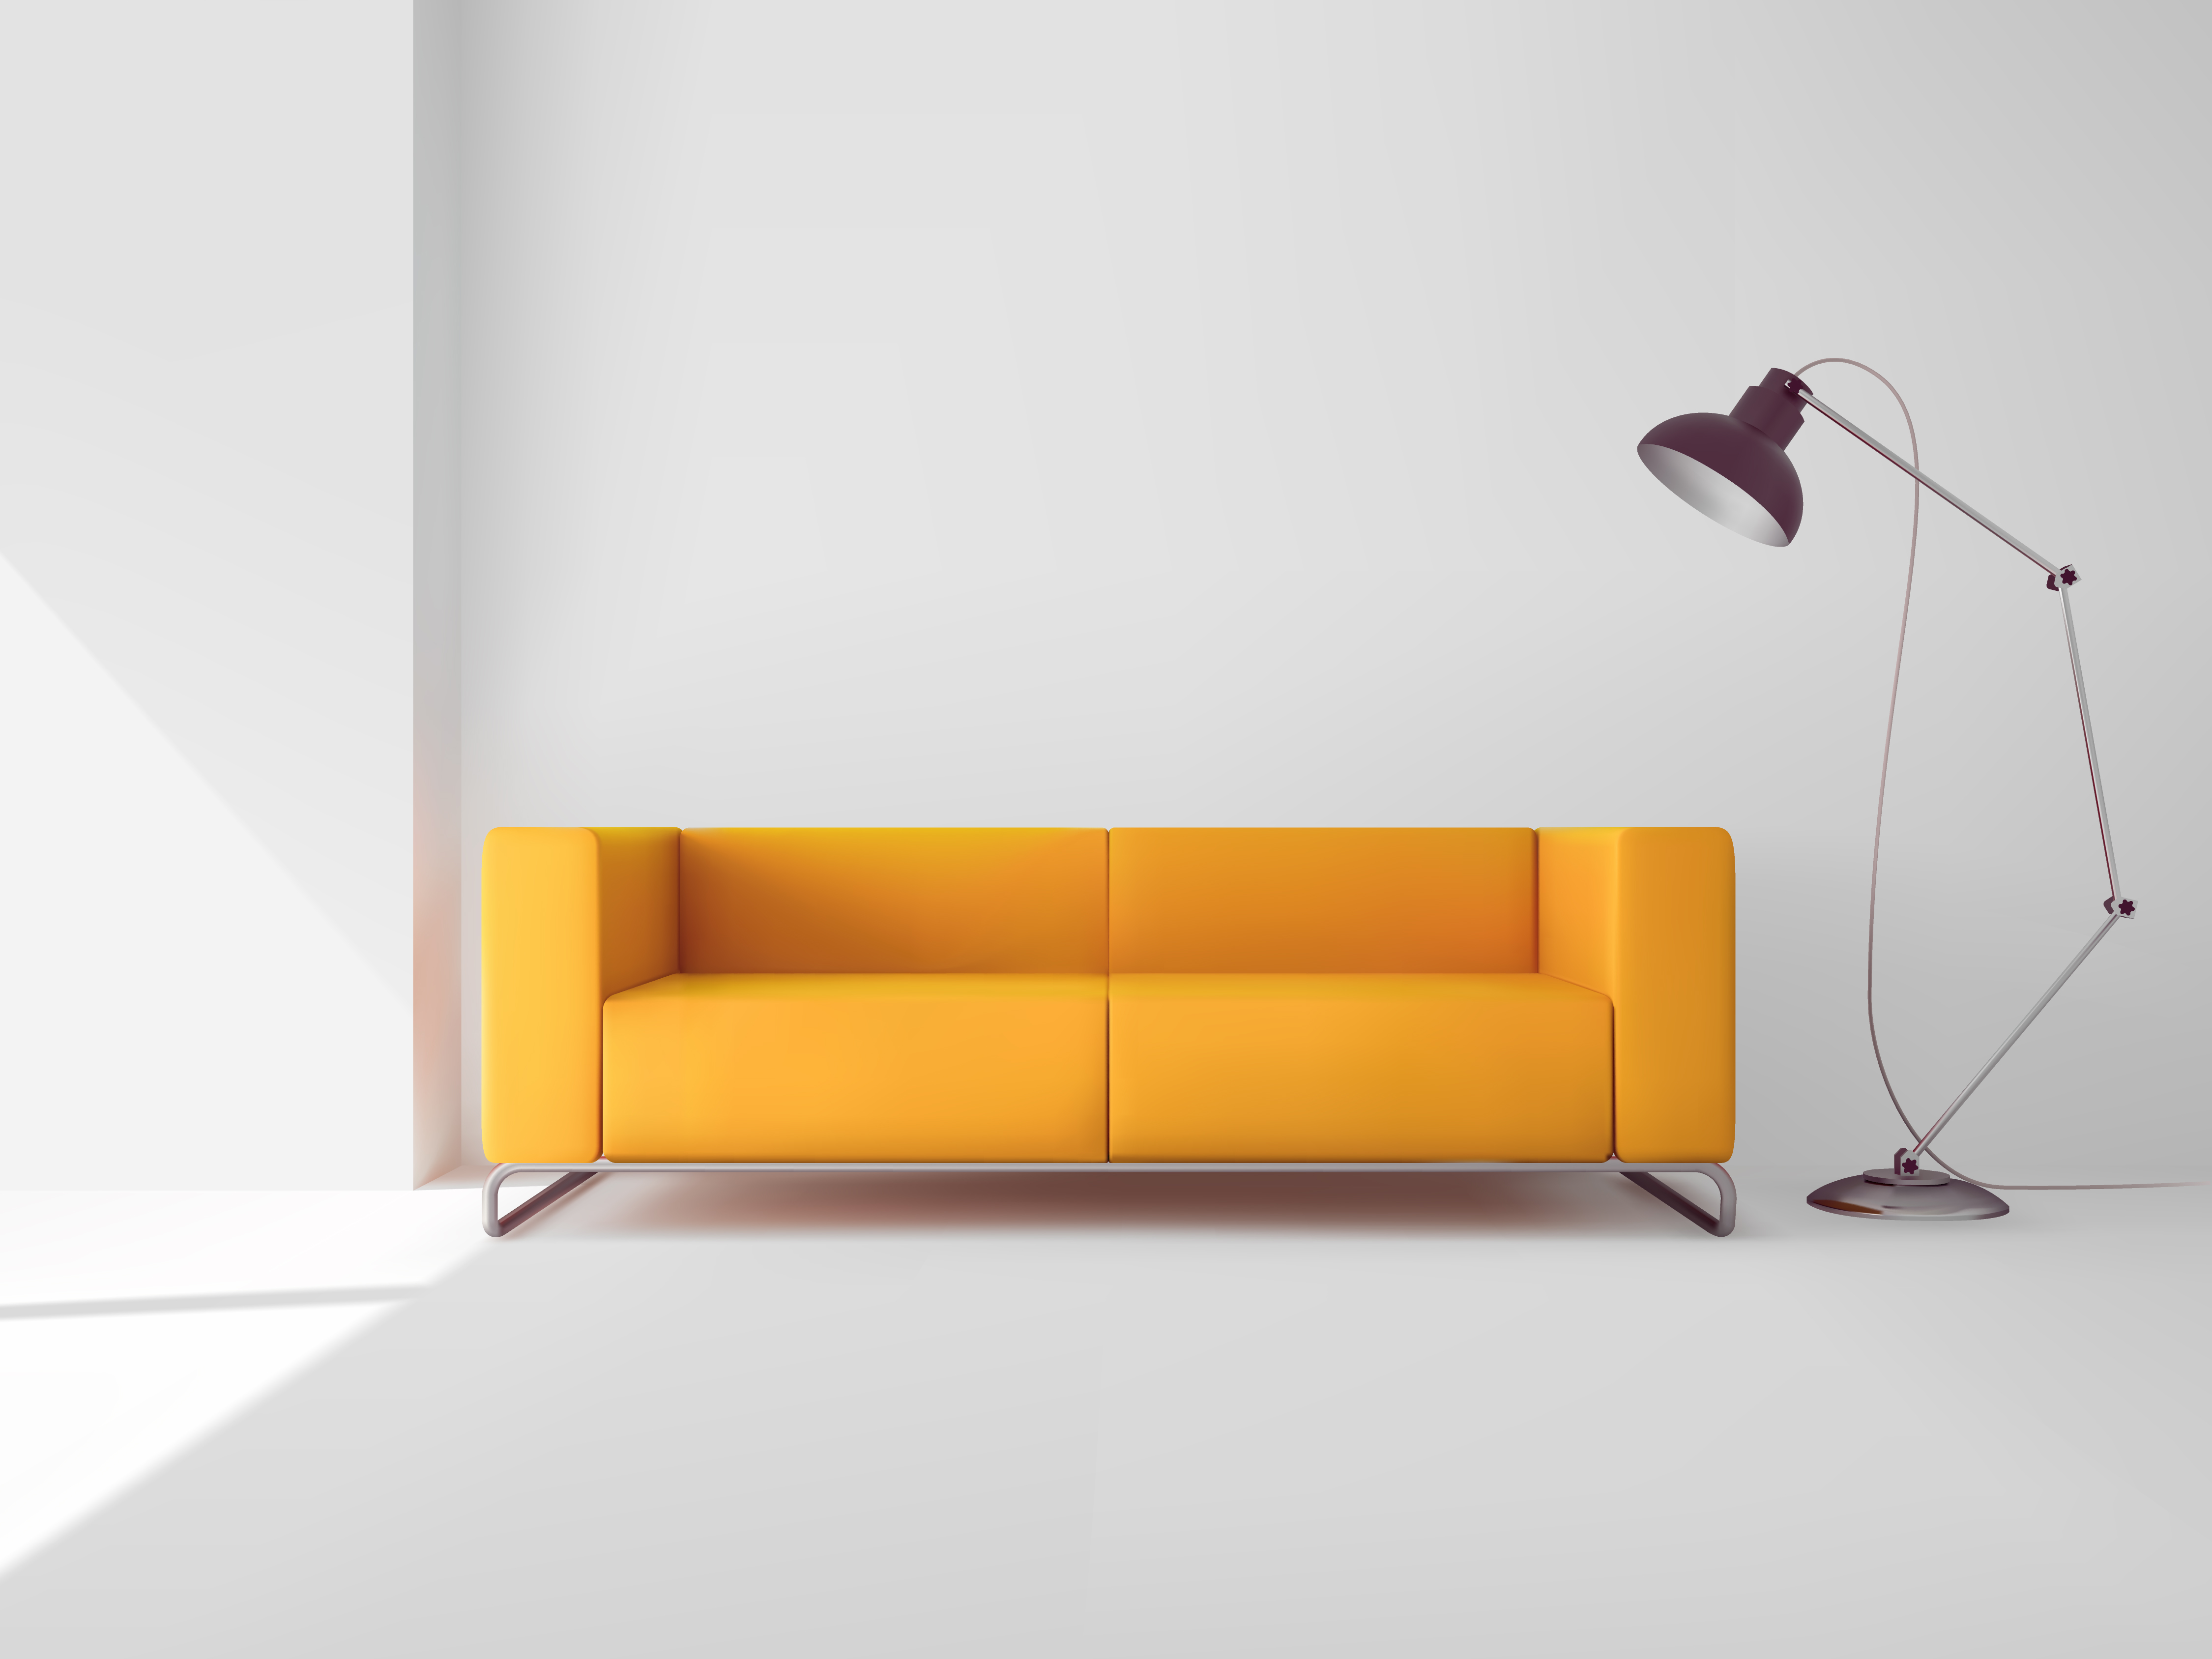 Gelbe Couch mit Lampe